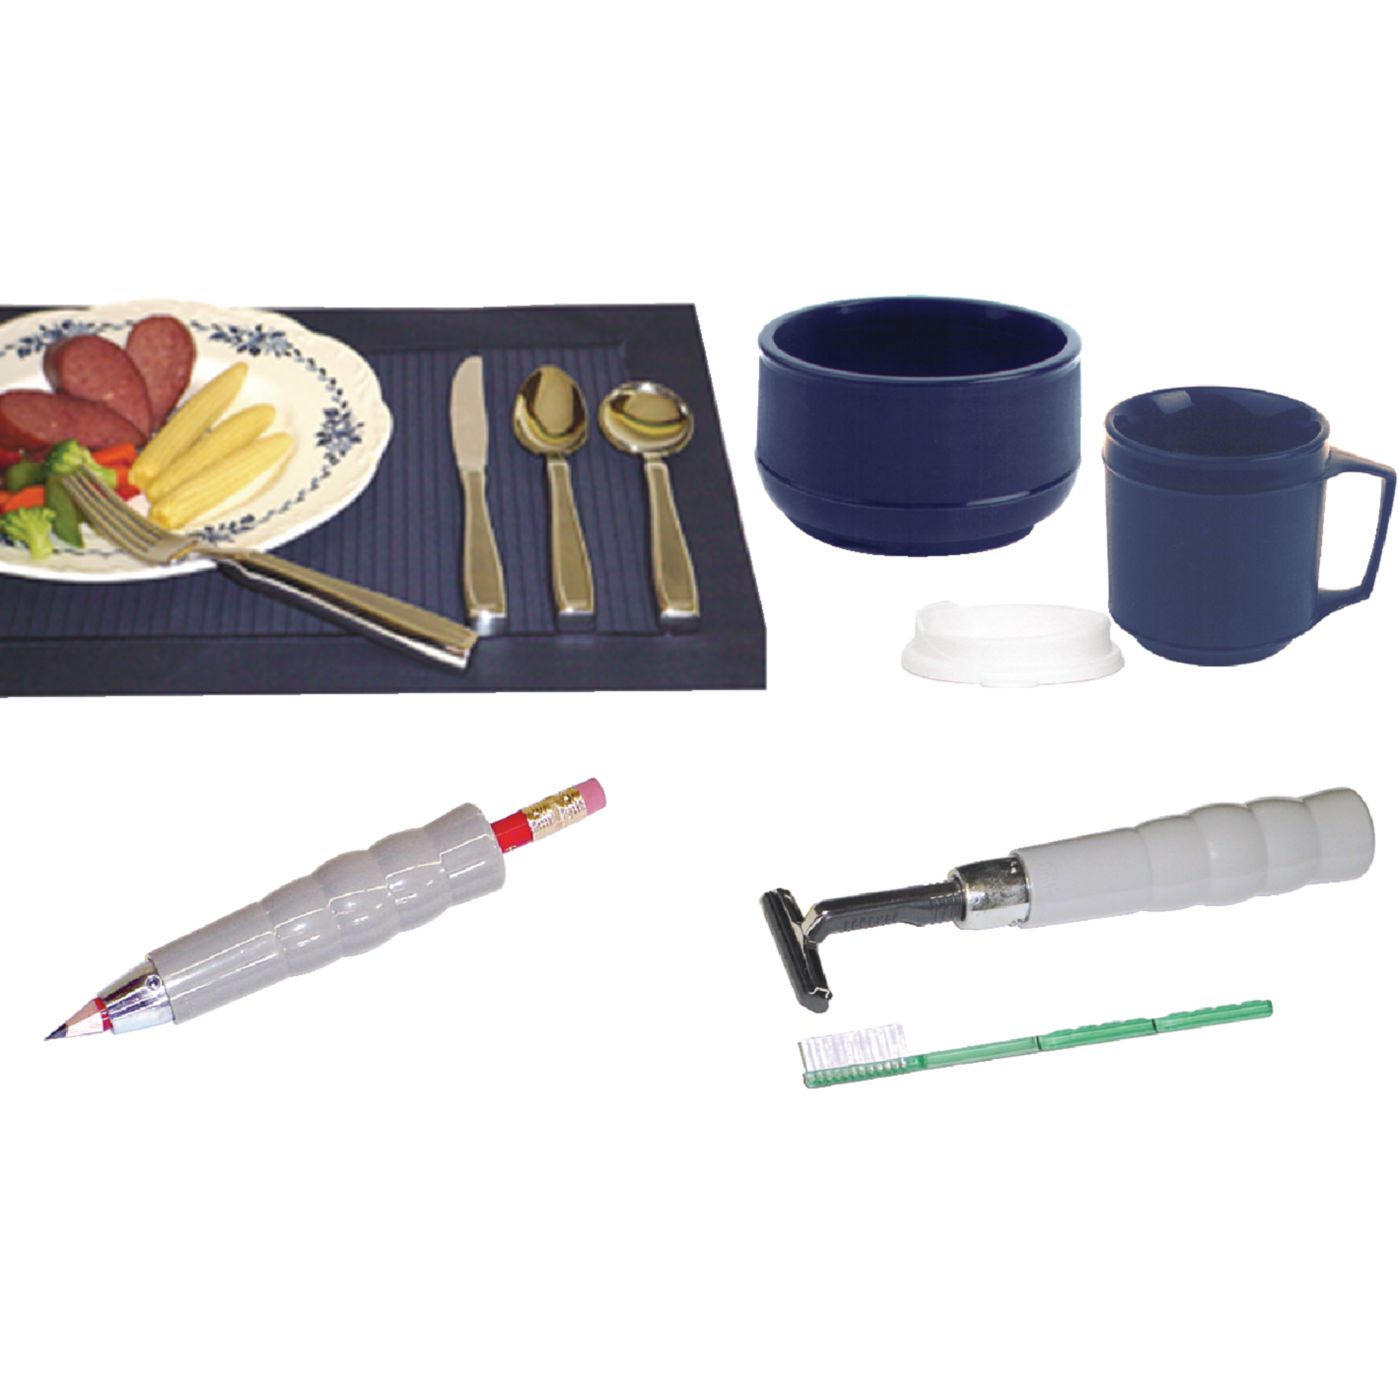 Parkinson's Deluxe Weighted Kit
